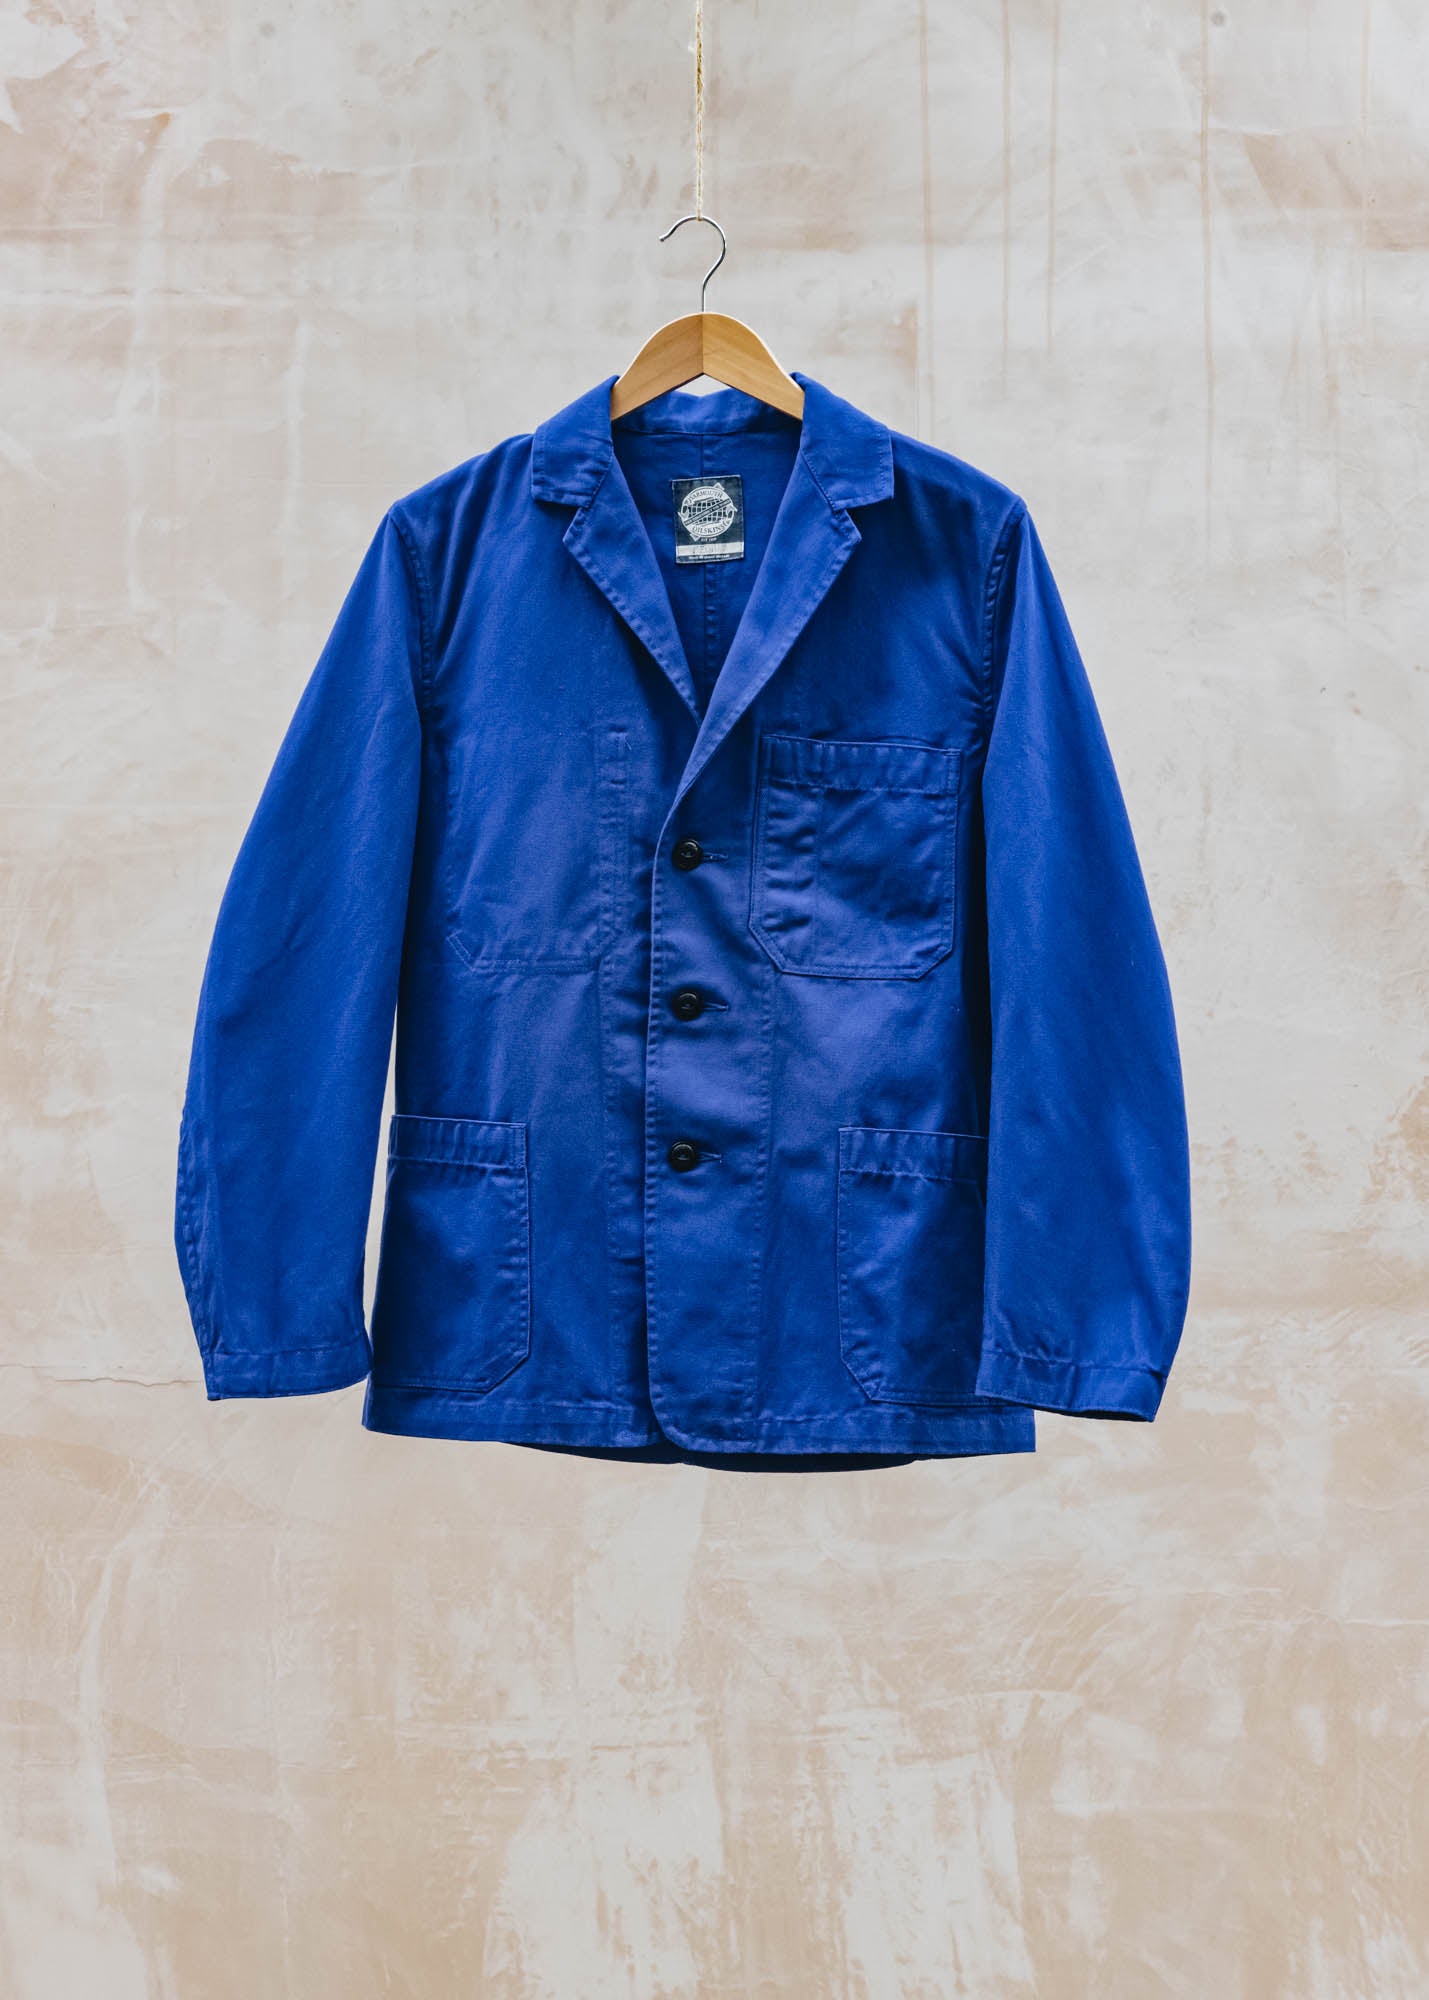 Yarmouth Oilskins Engineers Jacket in Royal Blue